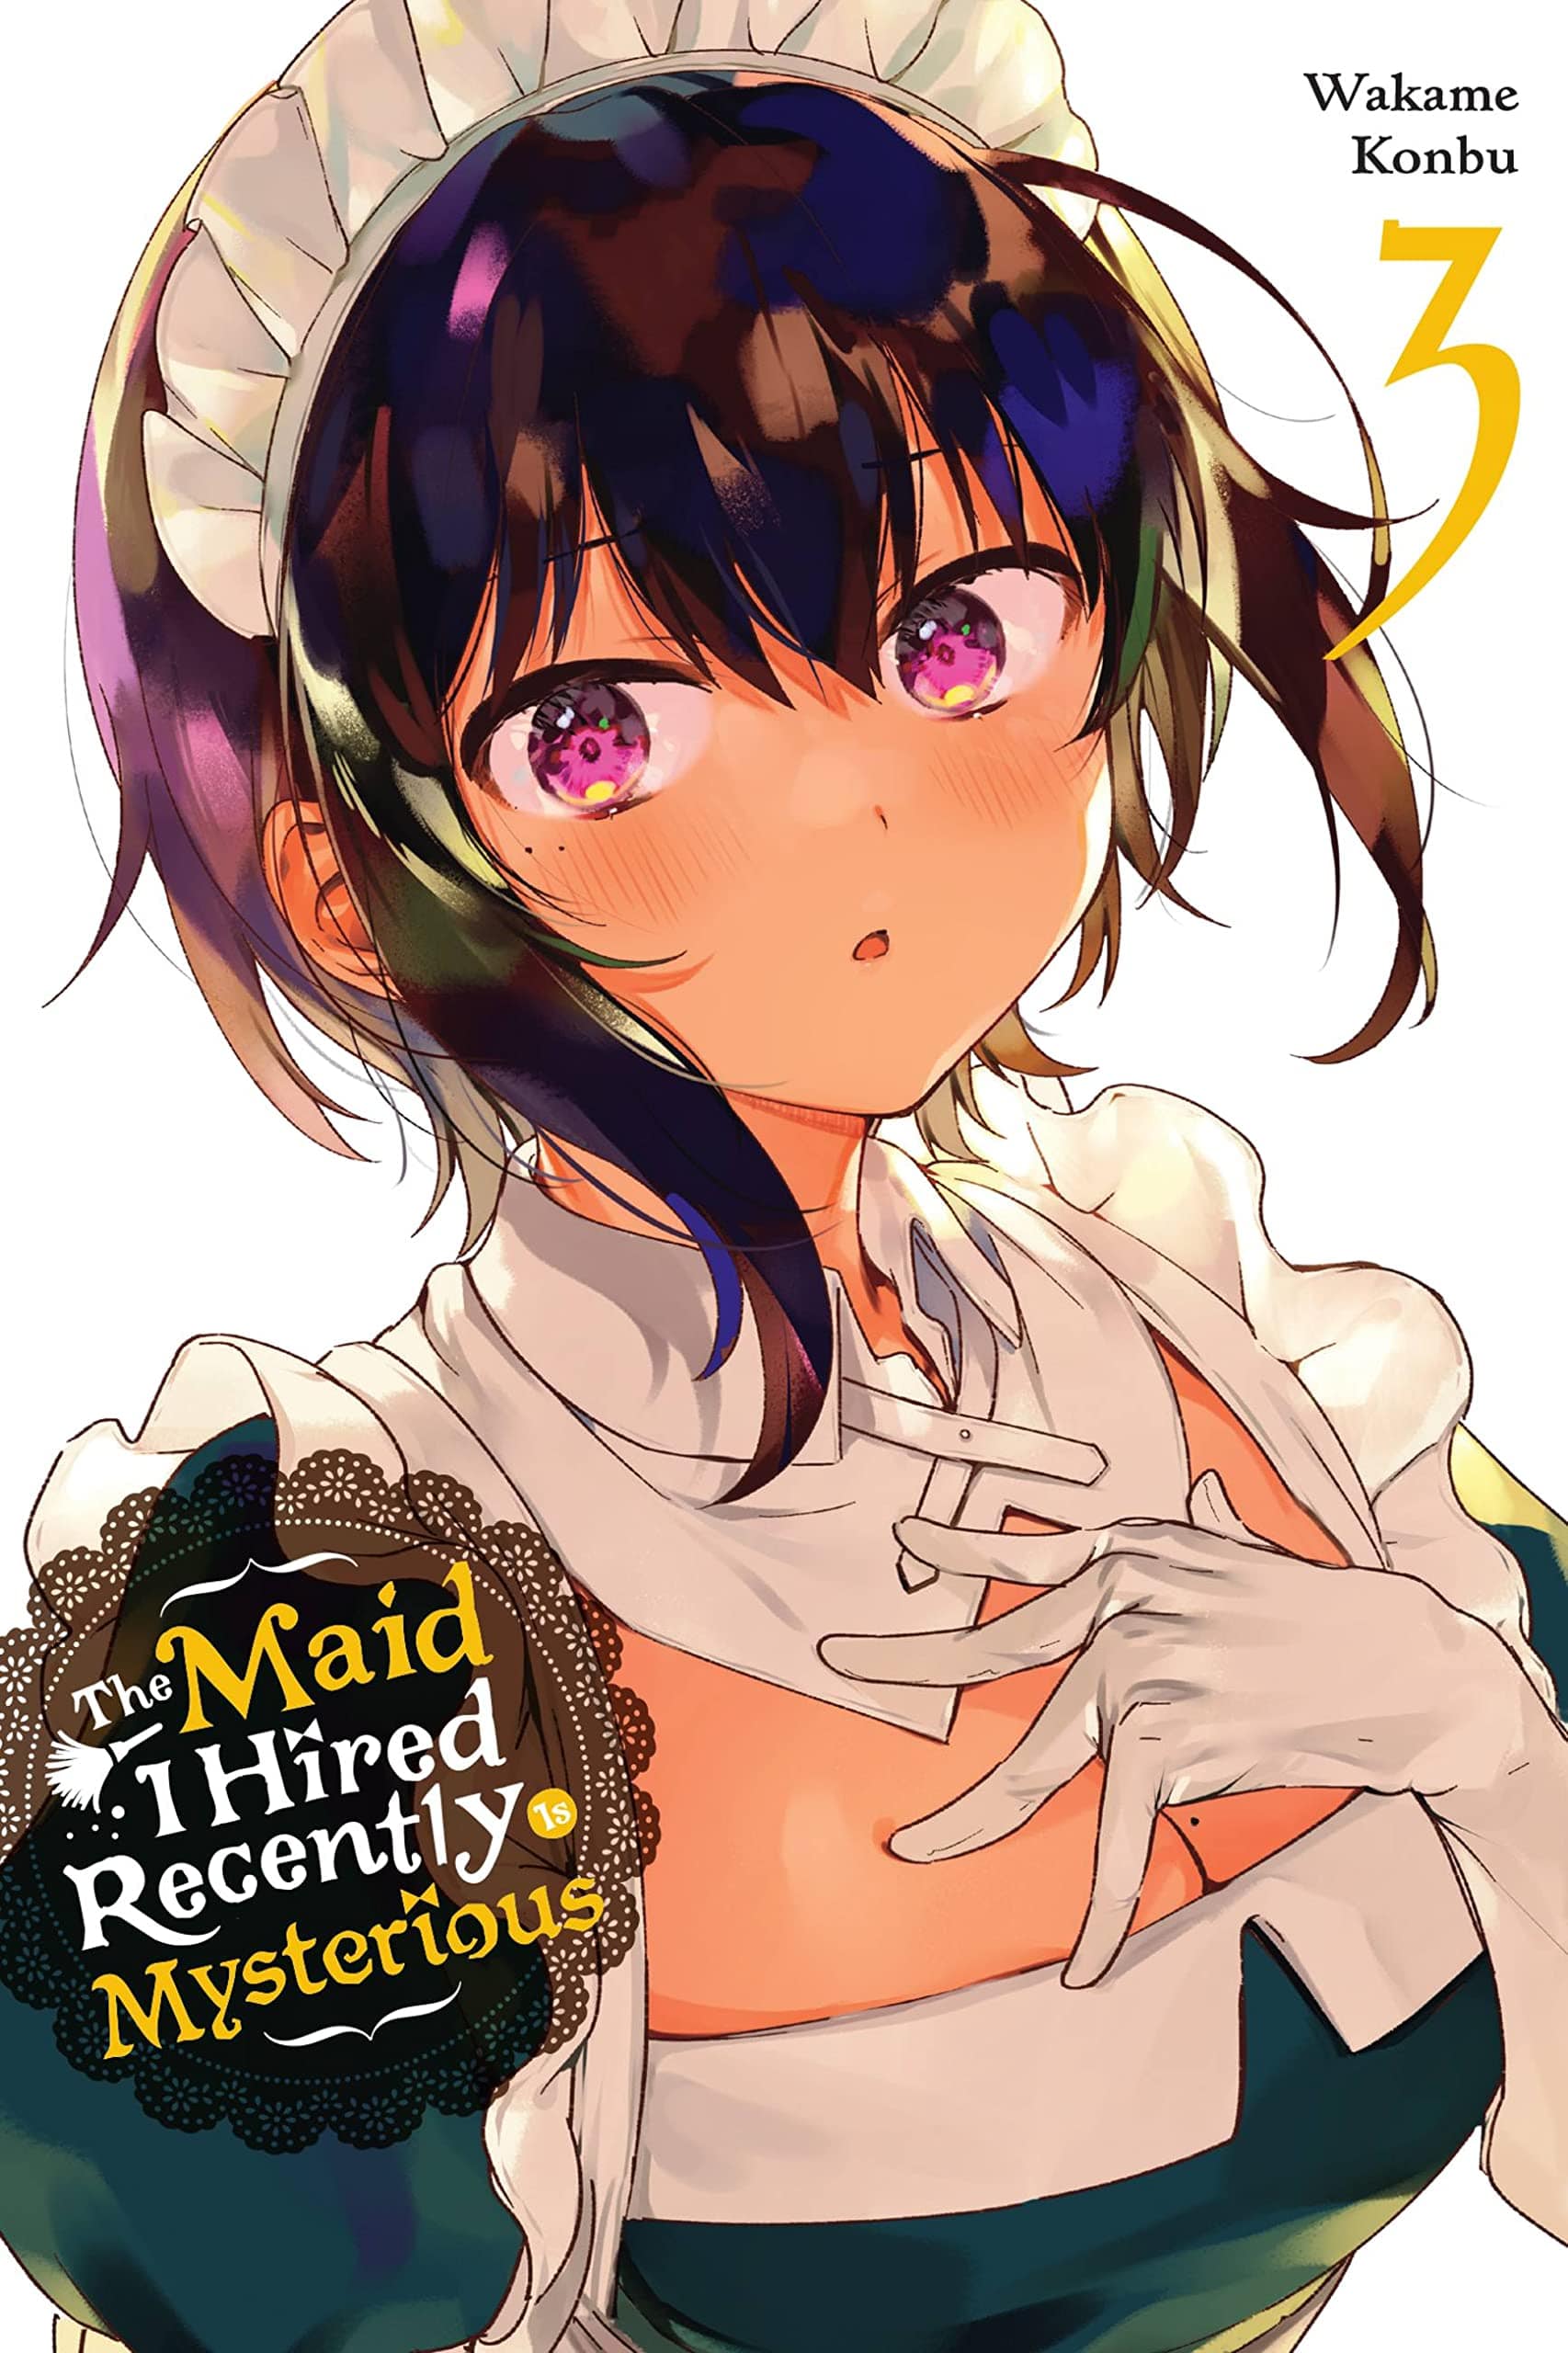 Maid I Hired Recently is Mysterious Vol. 3 - Third Eye